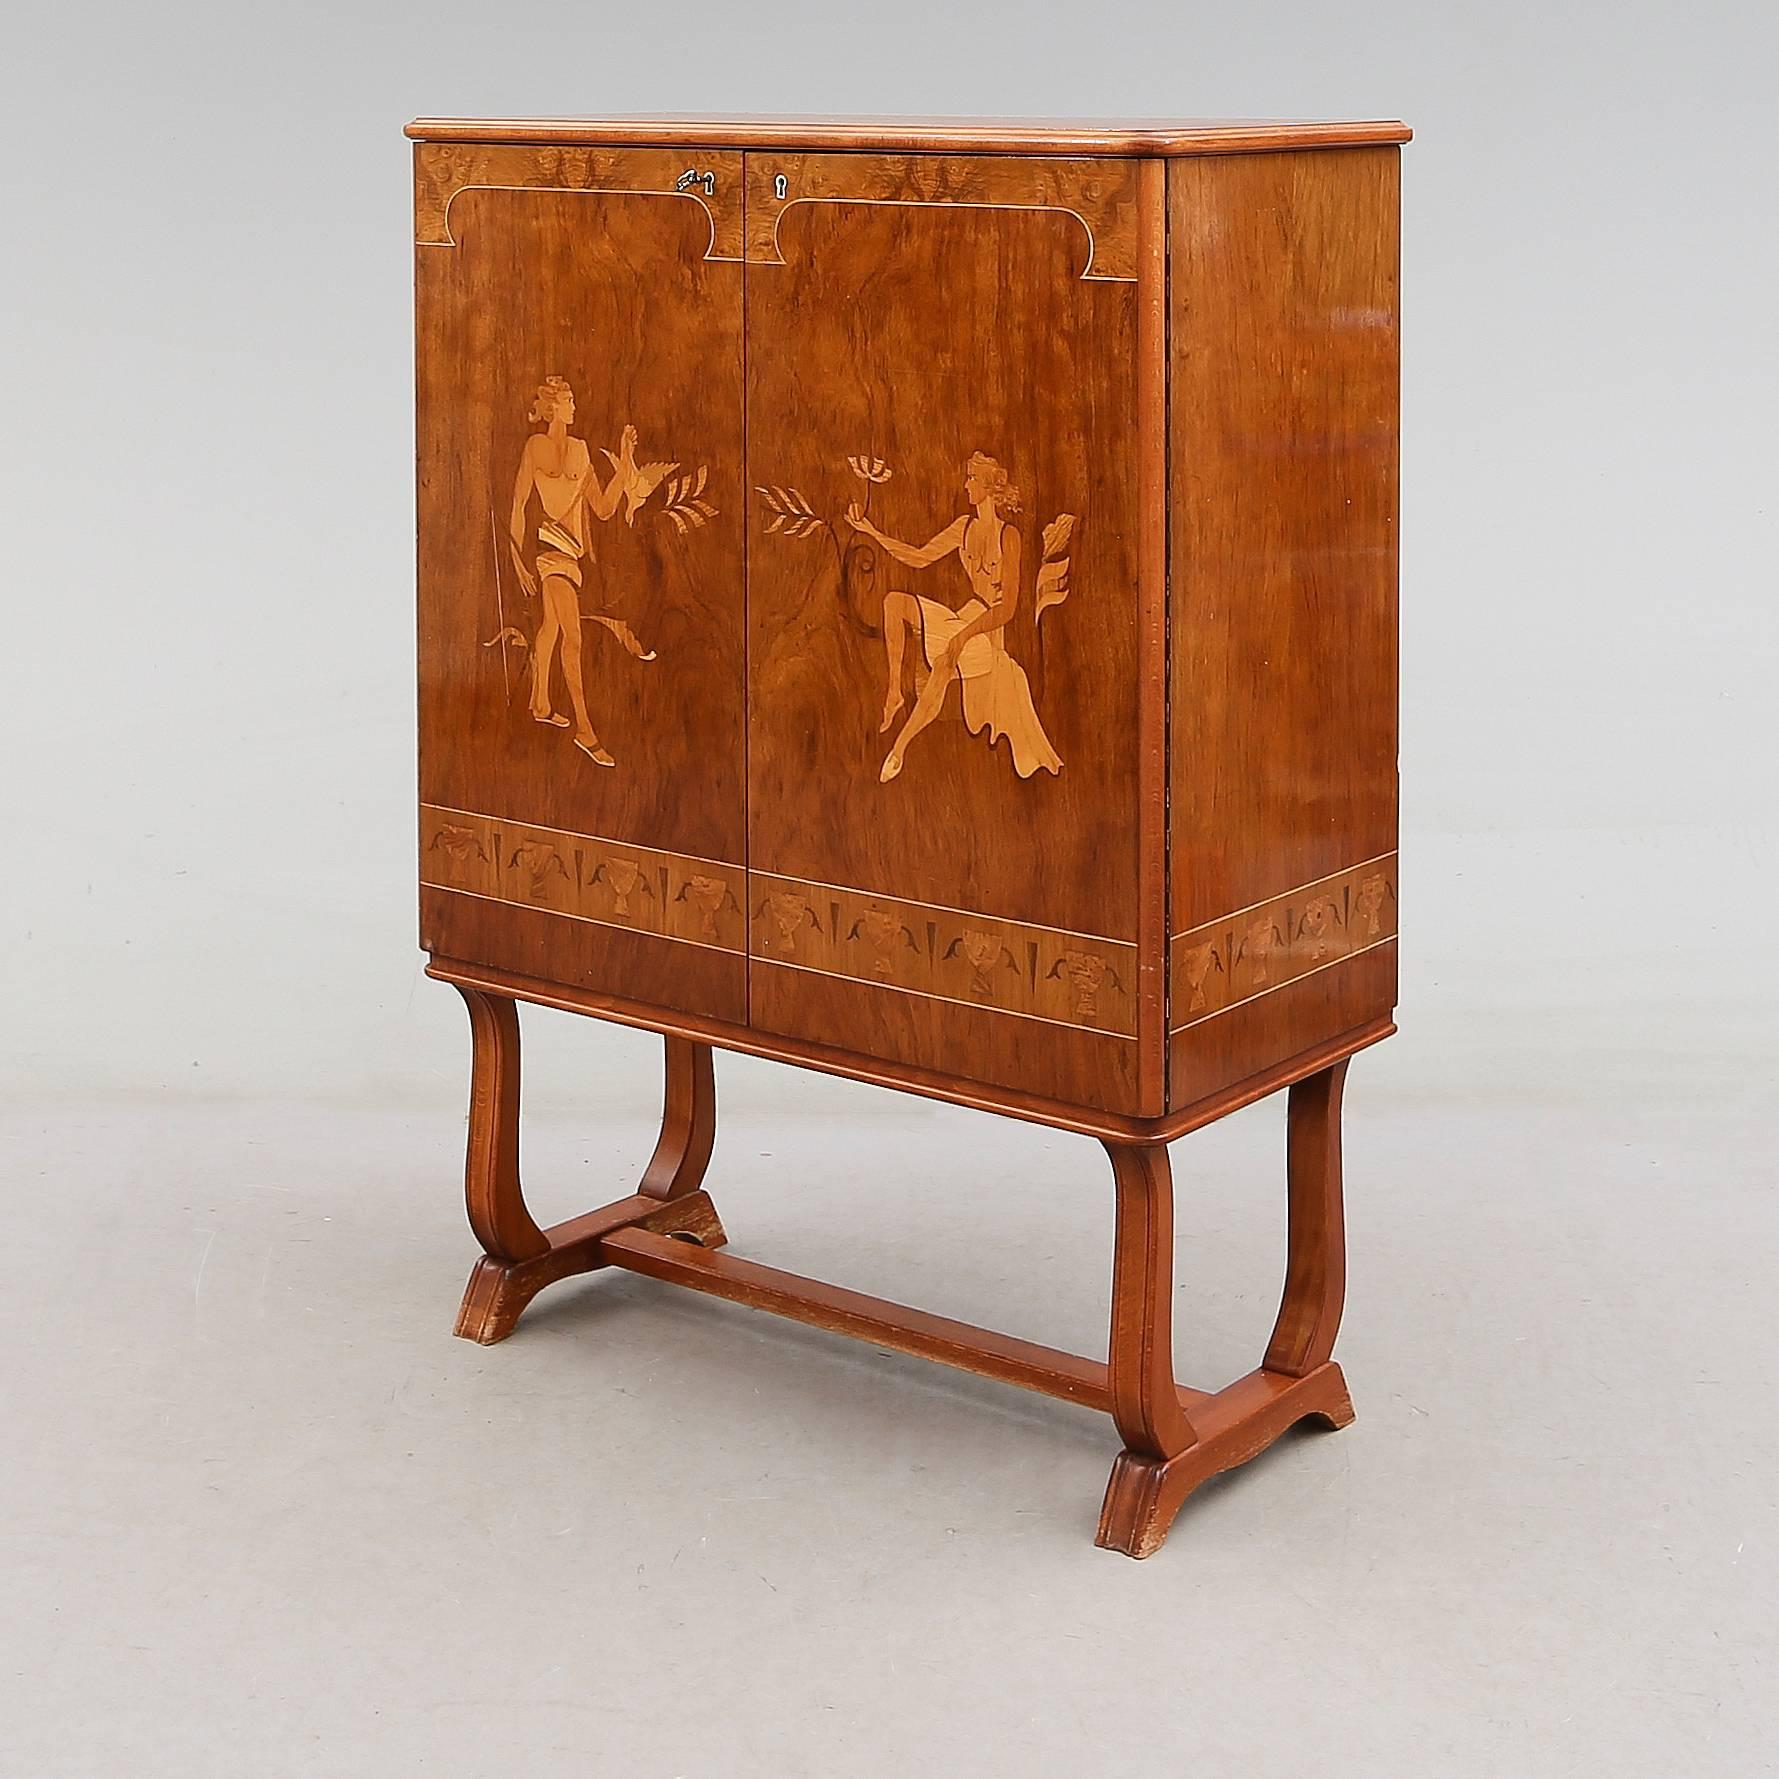 Intricately inlaid Swedish Grace (streamlined classicism circa 1920-1940) storage cabinet with allegorical male and female friezes. Rendered in walnut, birch, Carpathian elm and rosewood. 

Interior consists of removable or adjustable shelves and